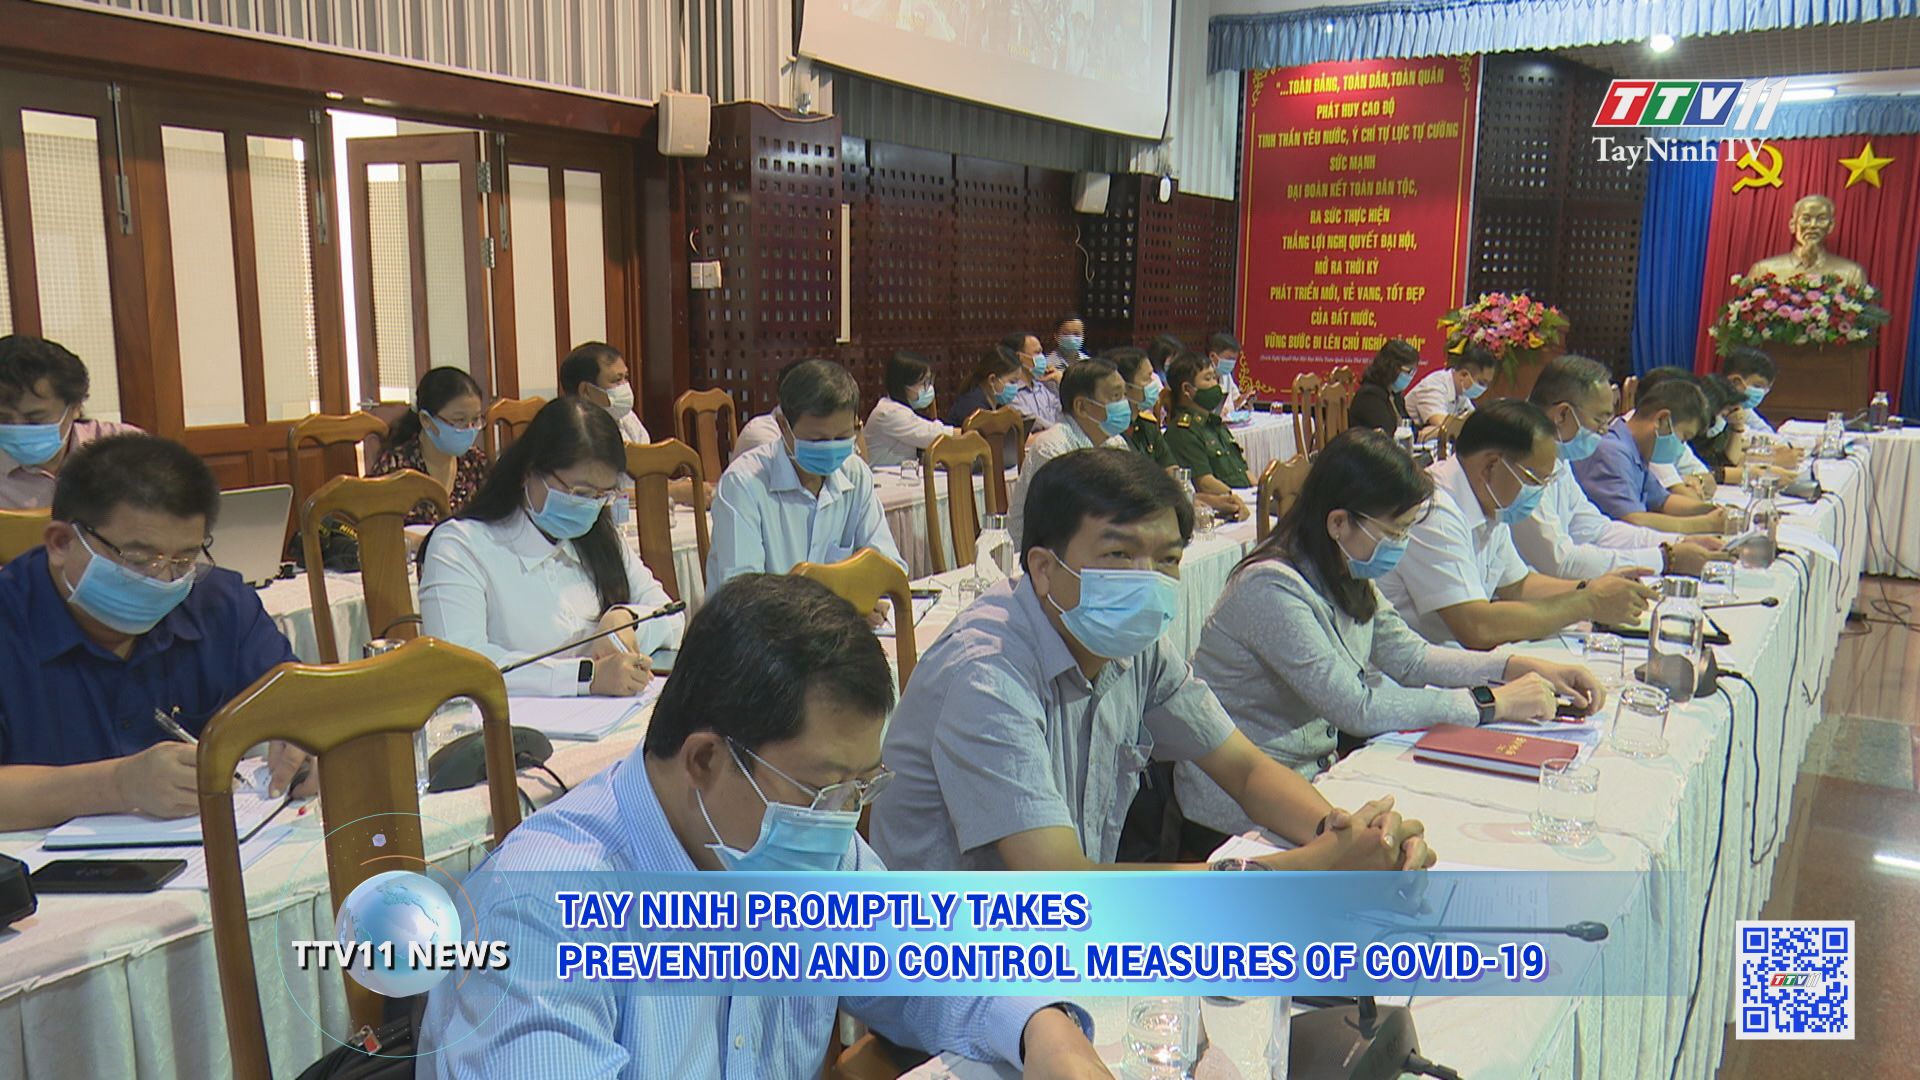 Tay Ninh promptly takes prevention and control measures of Covid-19 | TTVNEWS | TayNinhTV Today